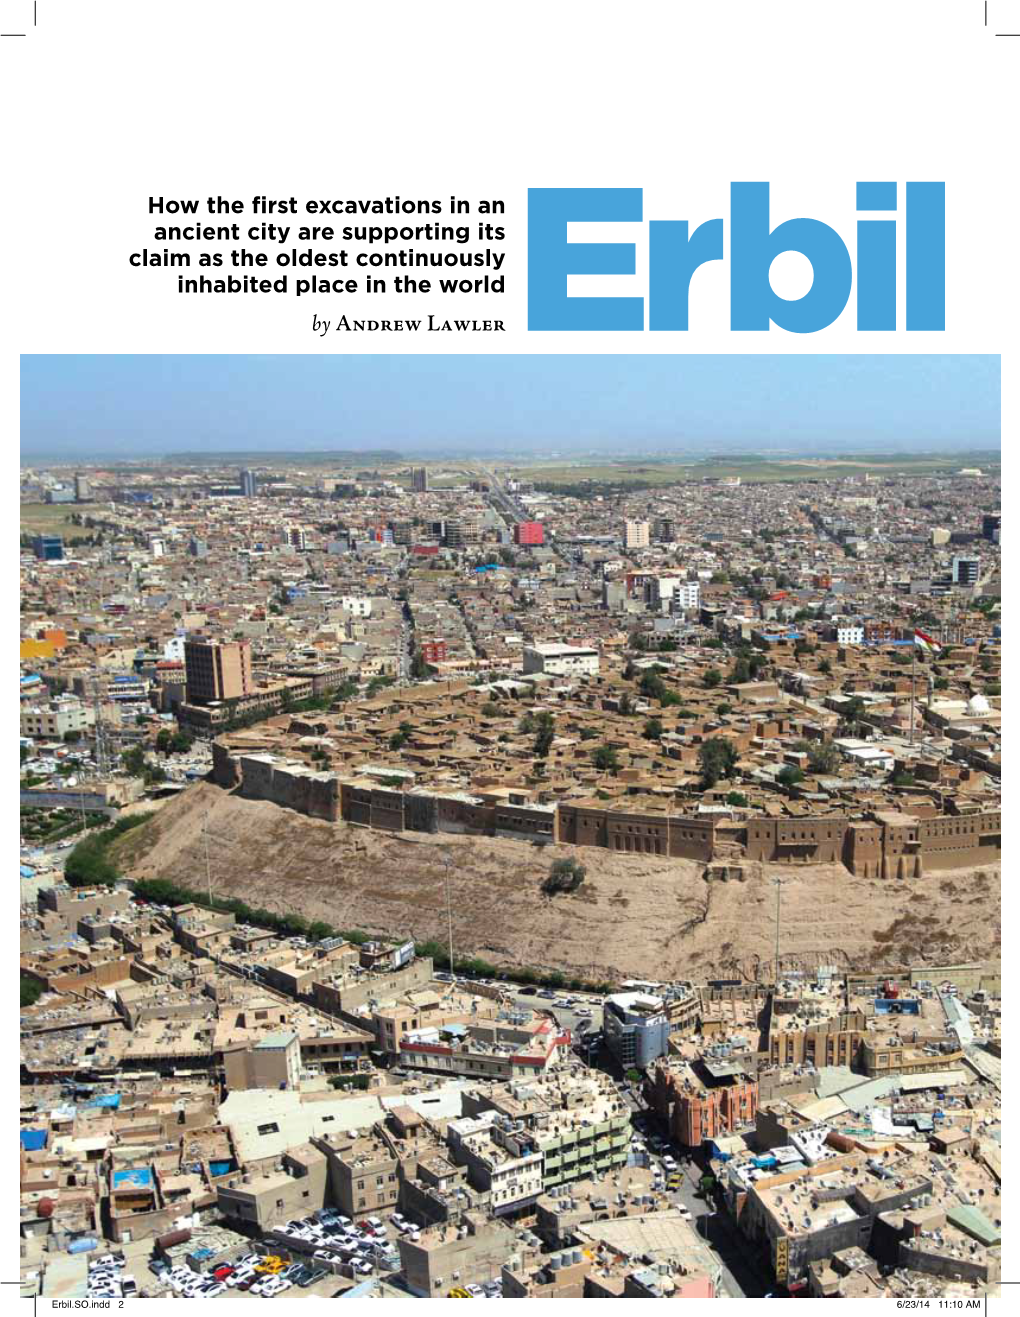 How the First Excavations in an Ancient City Are Supporting Its Claim As the Oldest Continuously Inhabited Place in the World by Andrew Lawler Erbil Revealed